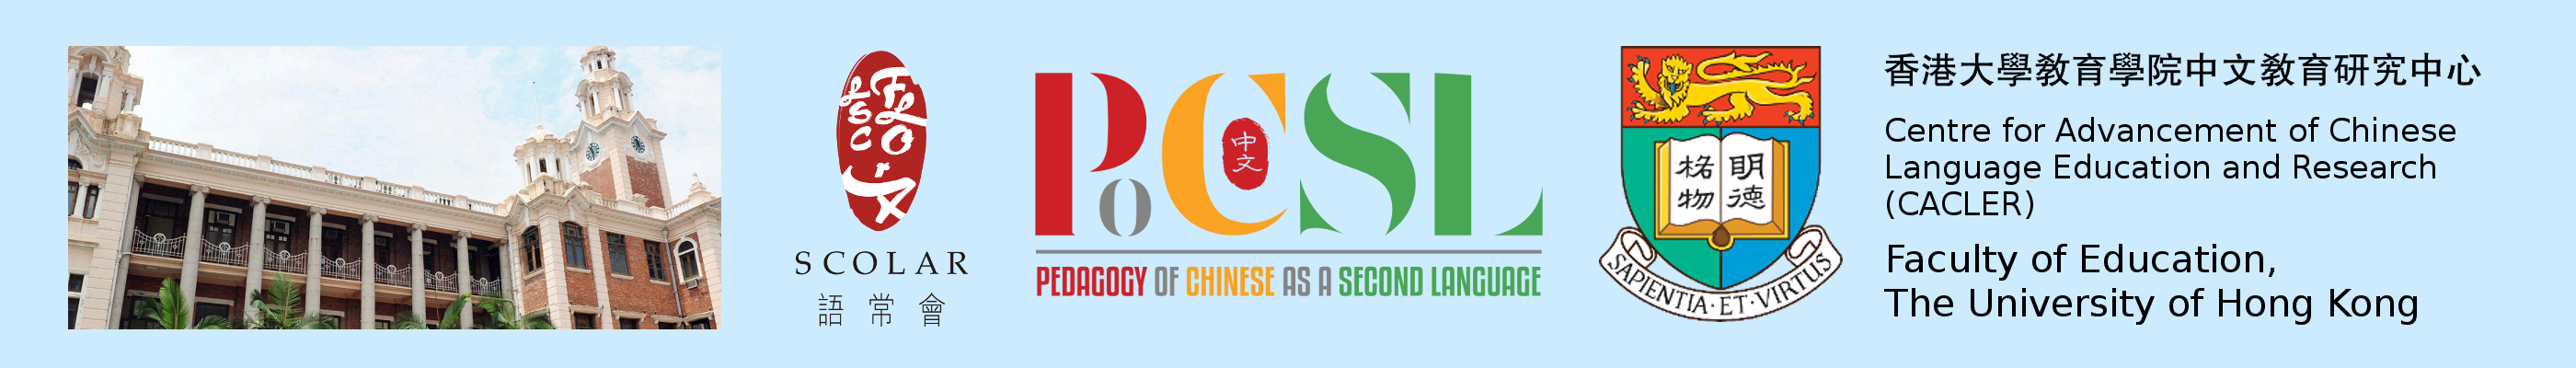 Supporting the Learning and Teaching of Chinese Language for Learners of Chinese as a Second Language in Secondary Schools (2016 - 2018) title